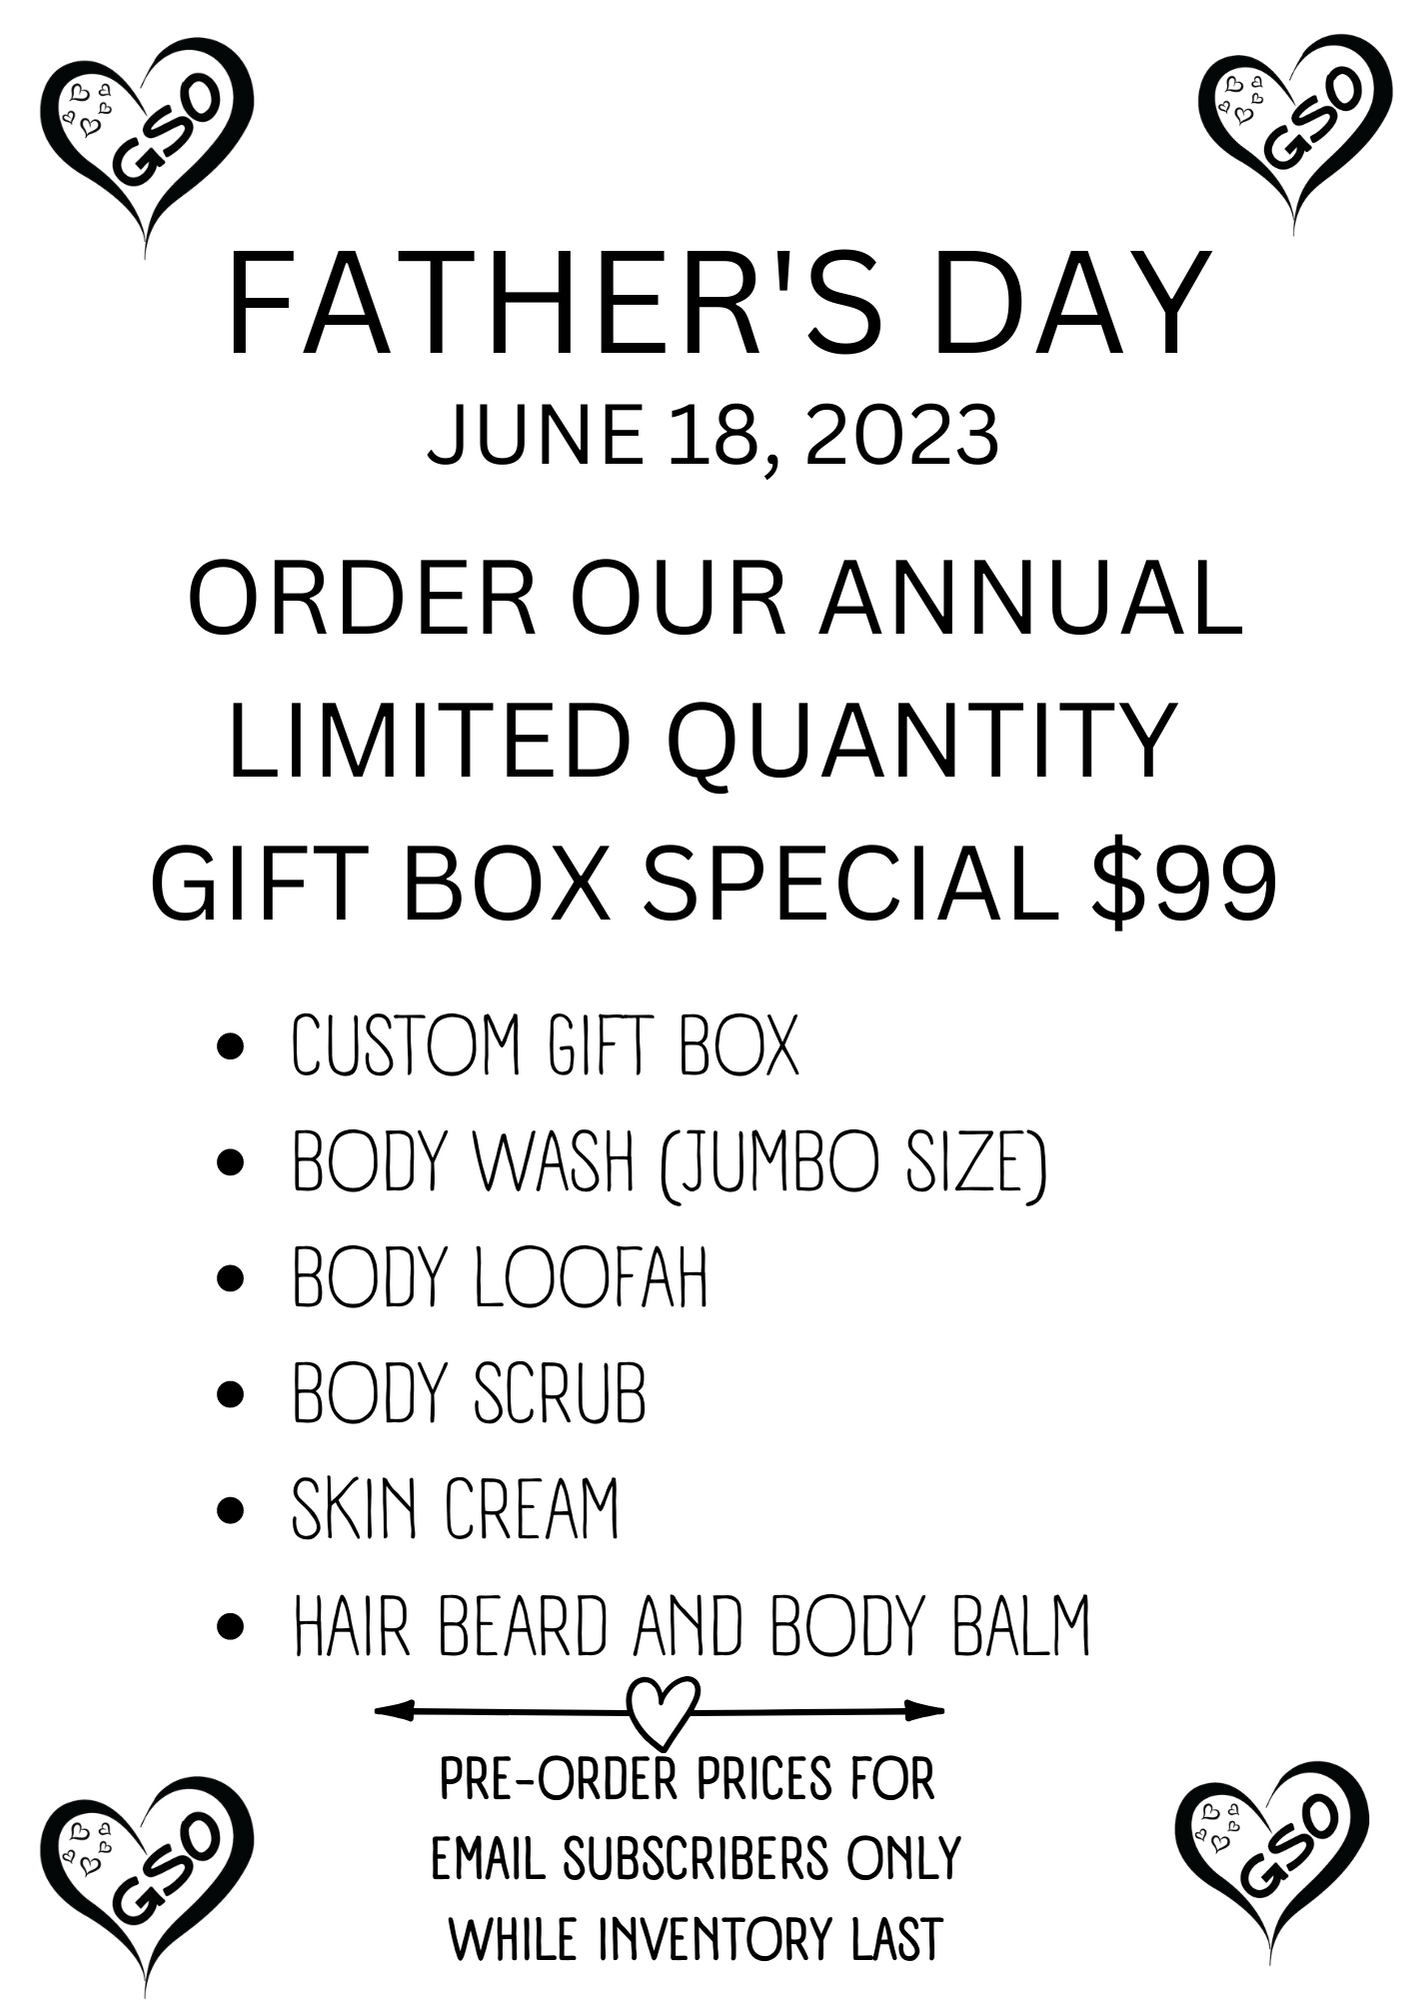 FATHER'S DAY GIFT BOX SPECIAL